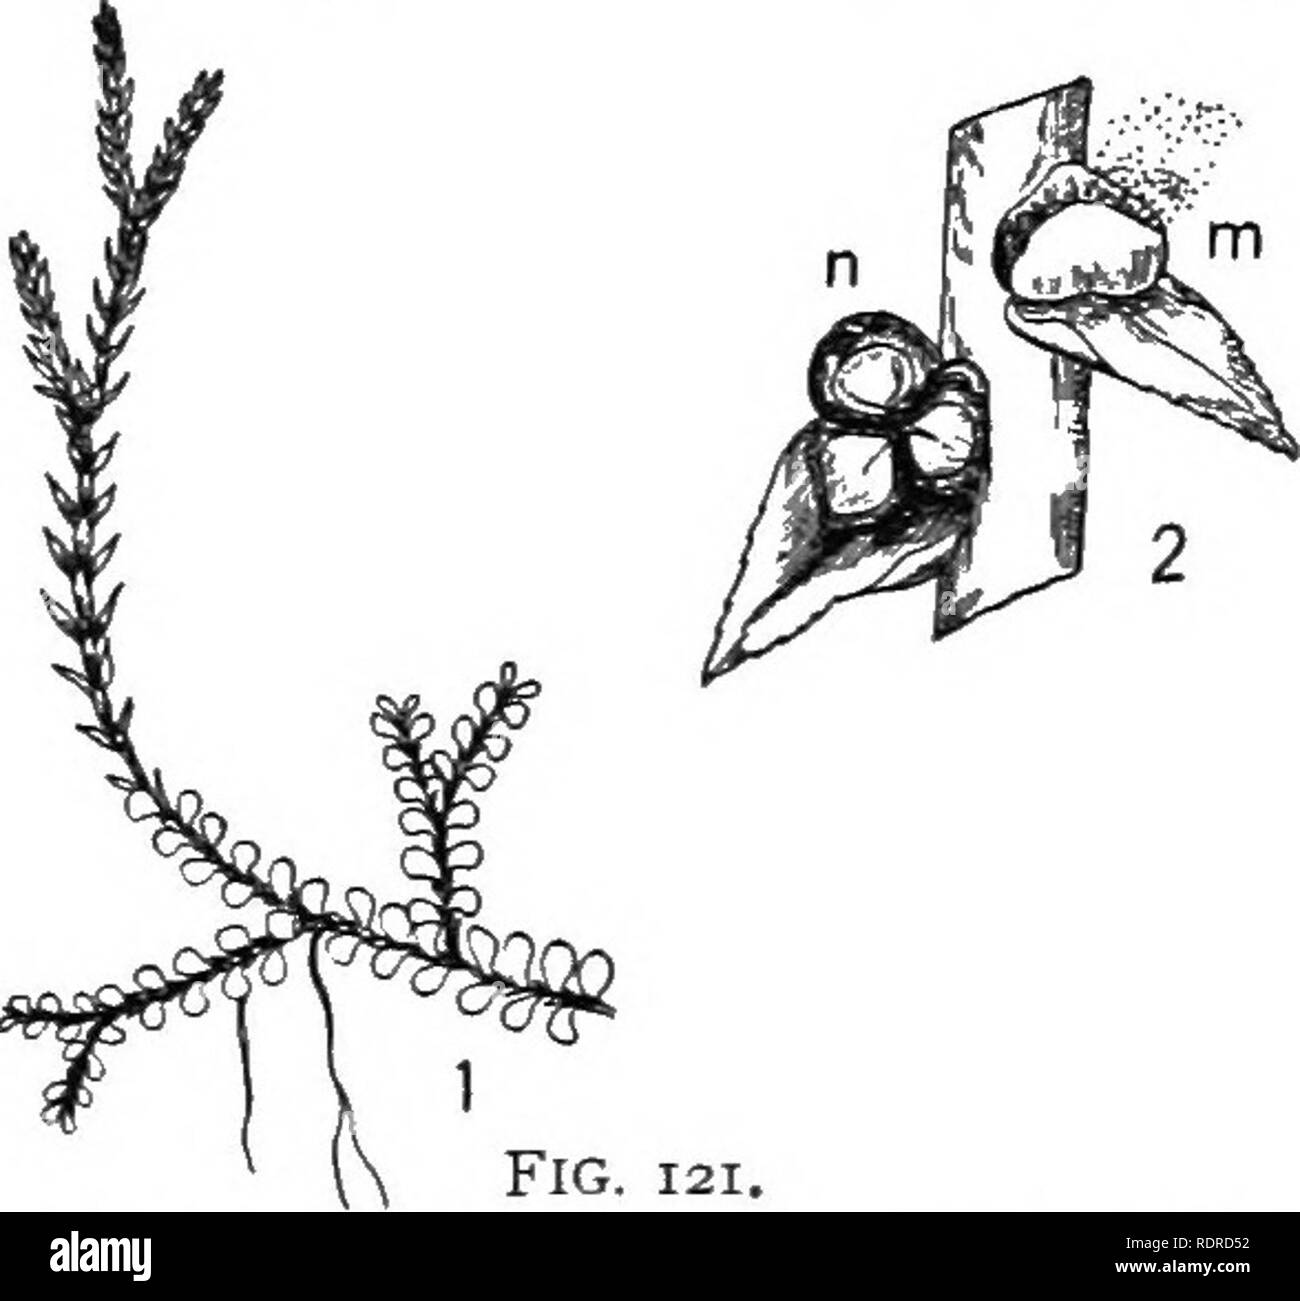 . Introduction to botany. Botany. Flowers. 203. does not differ from a foliage leaf in appearance. One kind of sporangium contains relatively small spores termed microspores (Fig. 121) which on germination give rise to a rudimentary plant body called prothallmm, bearing sperm cells; and the other sort of sporangium contains relatively large spores, the macro- spores (Fig. 121), which on germination produce a prothalUum bearing egg cells. The sporangium containing macrospores is termed niacrosporan- gimn, and the sporophyll subtending it macrosporo- phyll, while the corre- sponding parts relati Stock Photo